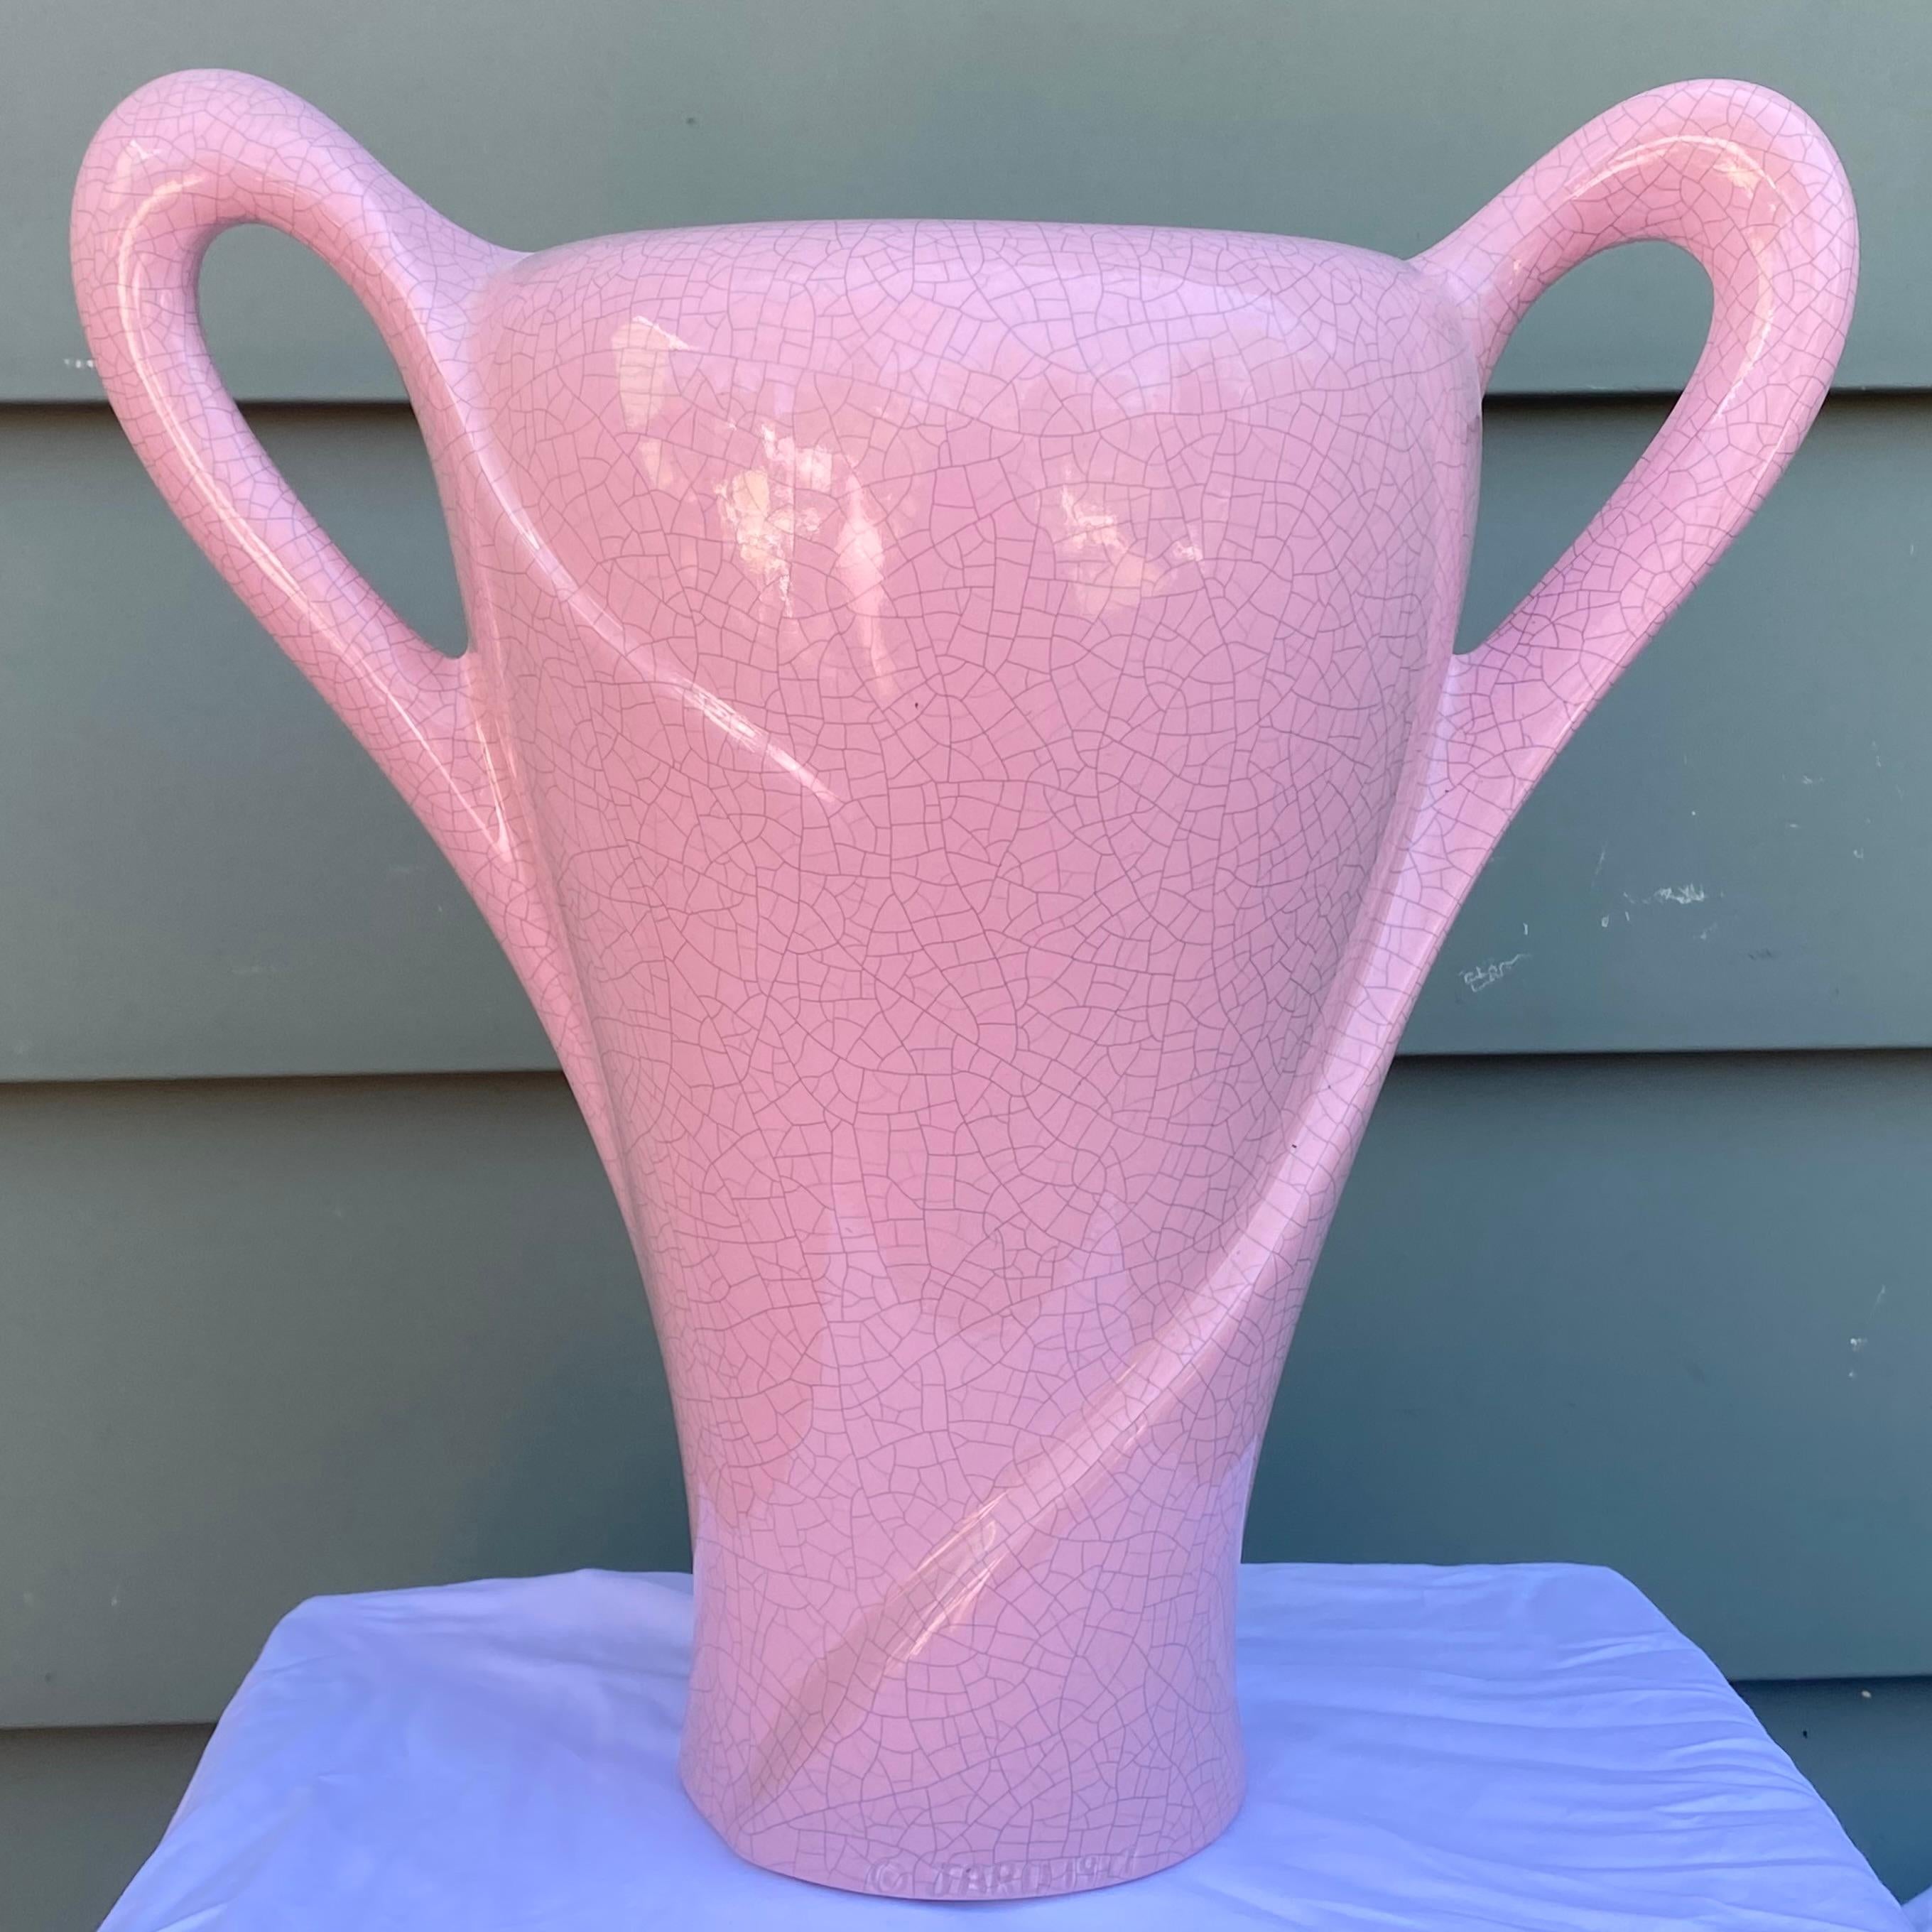 A fantastic artisan made two-handled sculptural ceramic vase fired in a pink crackle glaze finish by the California pottery company Jaru.